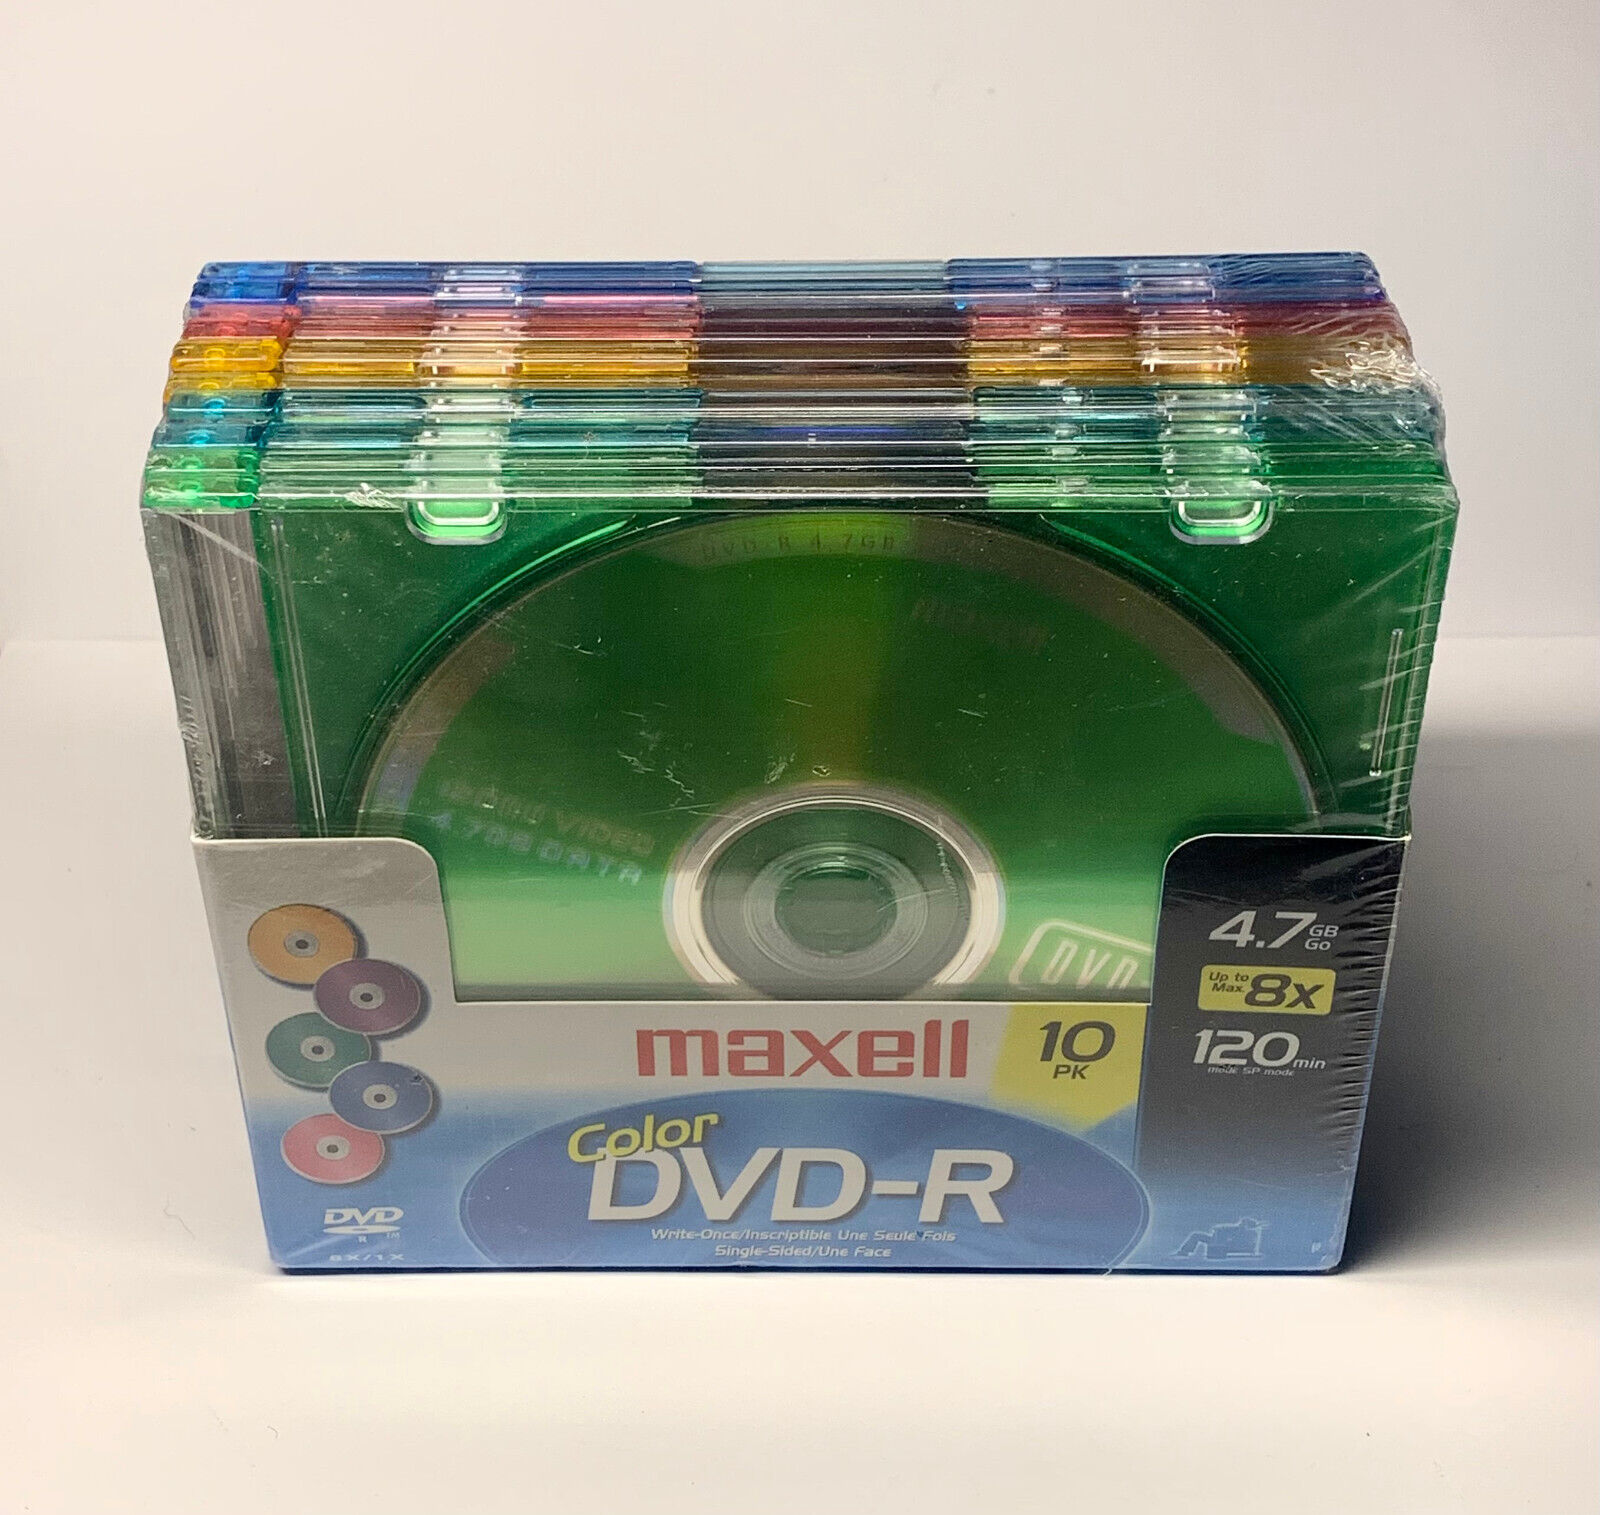 Maxell Color DVD-R 10 Pack 4.7 GB 8x / 120 Min Blank DVDR Write Once Media Discs